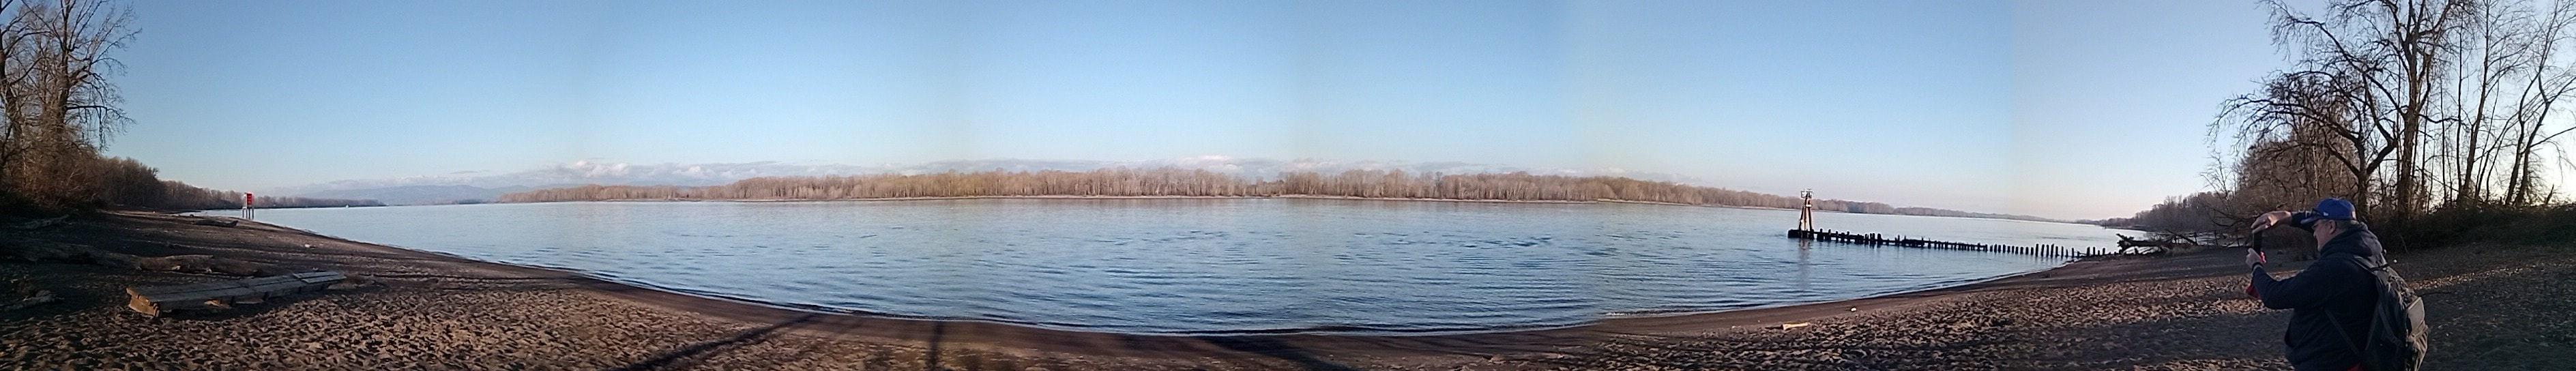 A Panorama of Collins Beach and the Columbia River, Sauvie Island, Oregon, February 2022